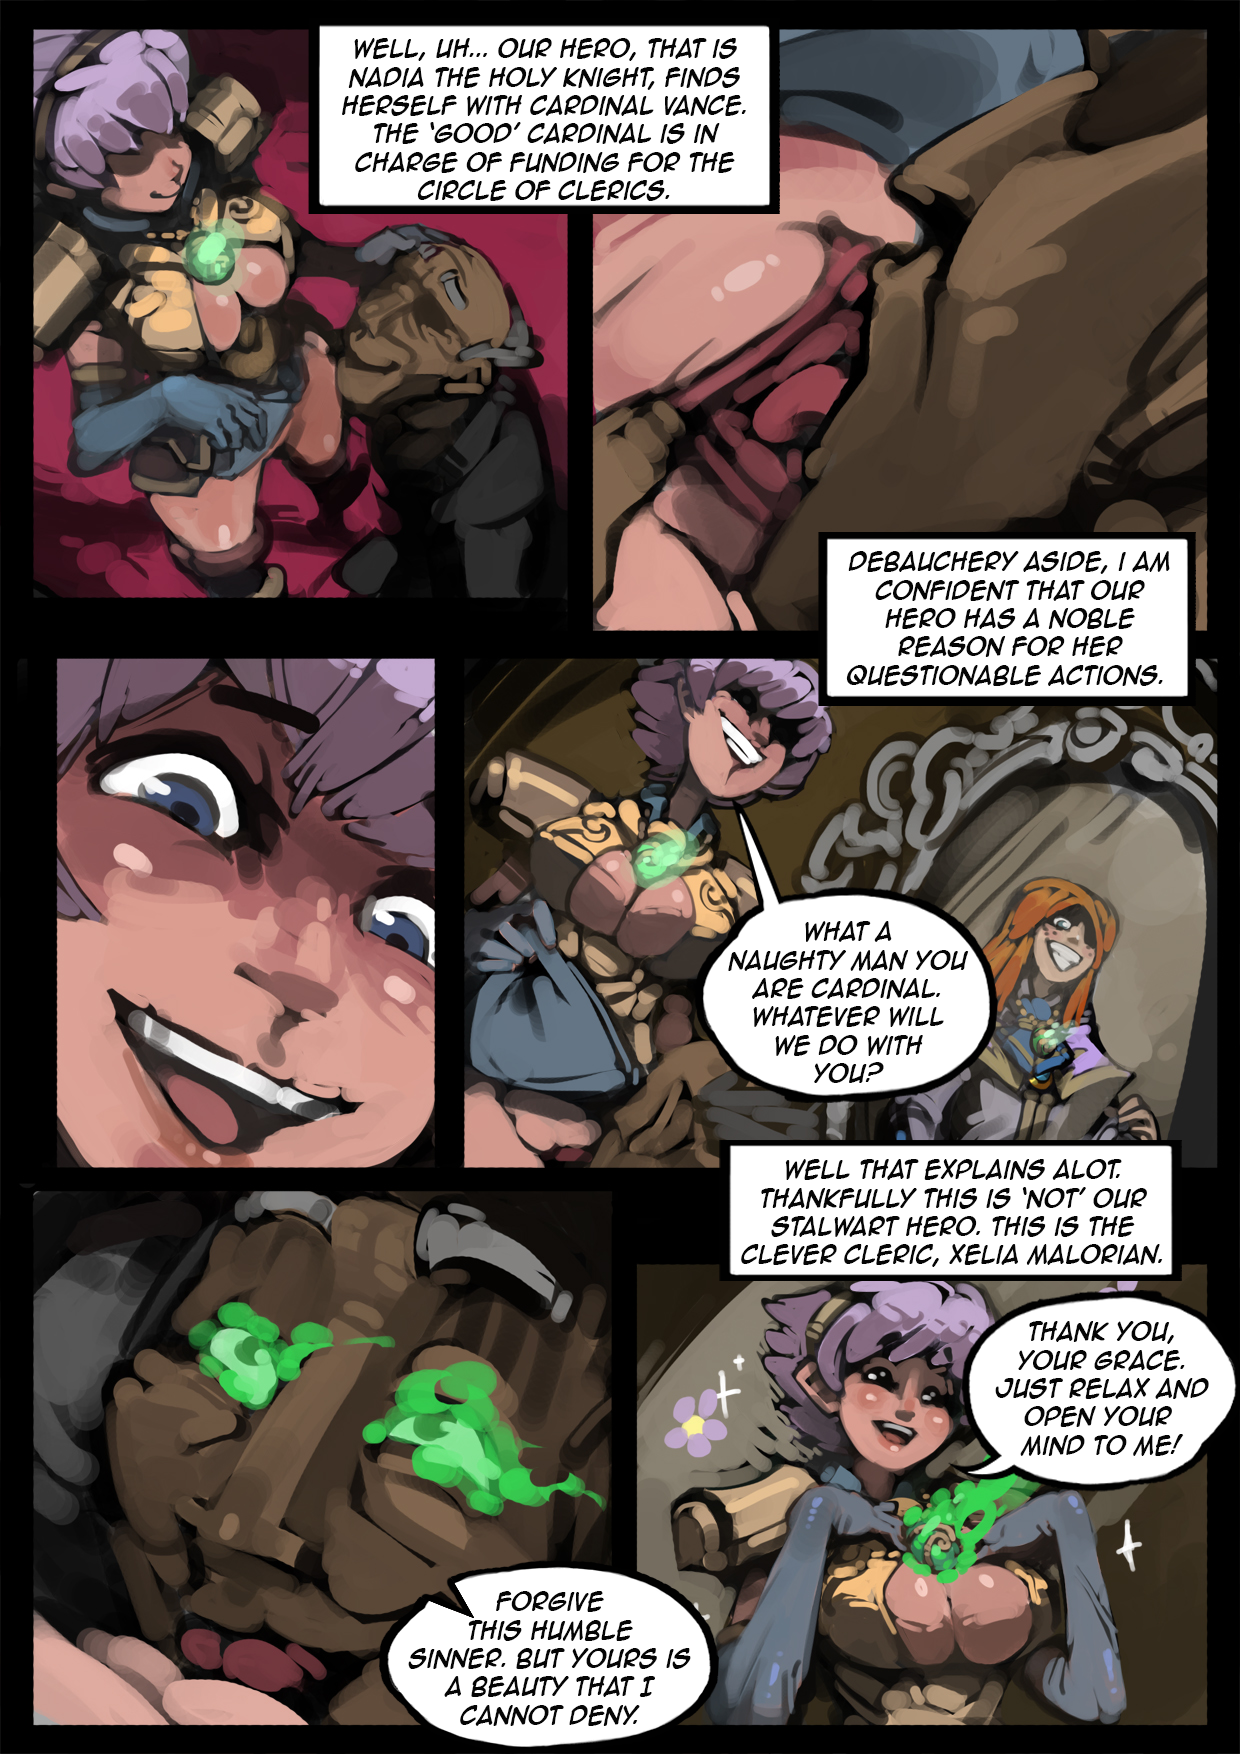 thablackrook_390314_Holy_Knight_Nadia_Page_2.png